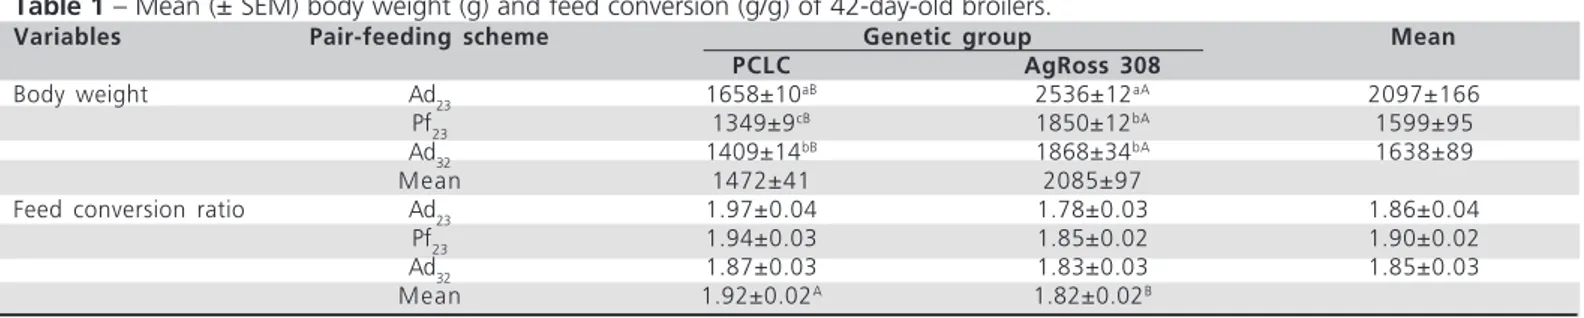 Table 1  – Mean (± SEM) body weight (g) and feed conversion (g/g) of 42-day-old broilers.